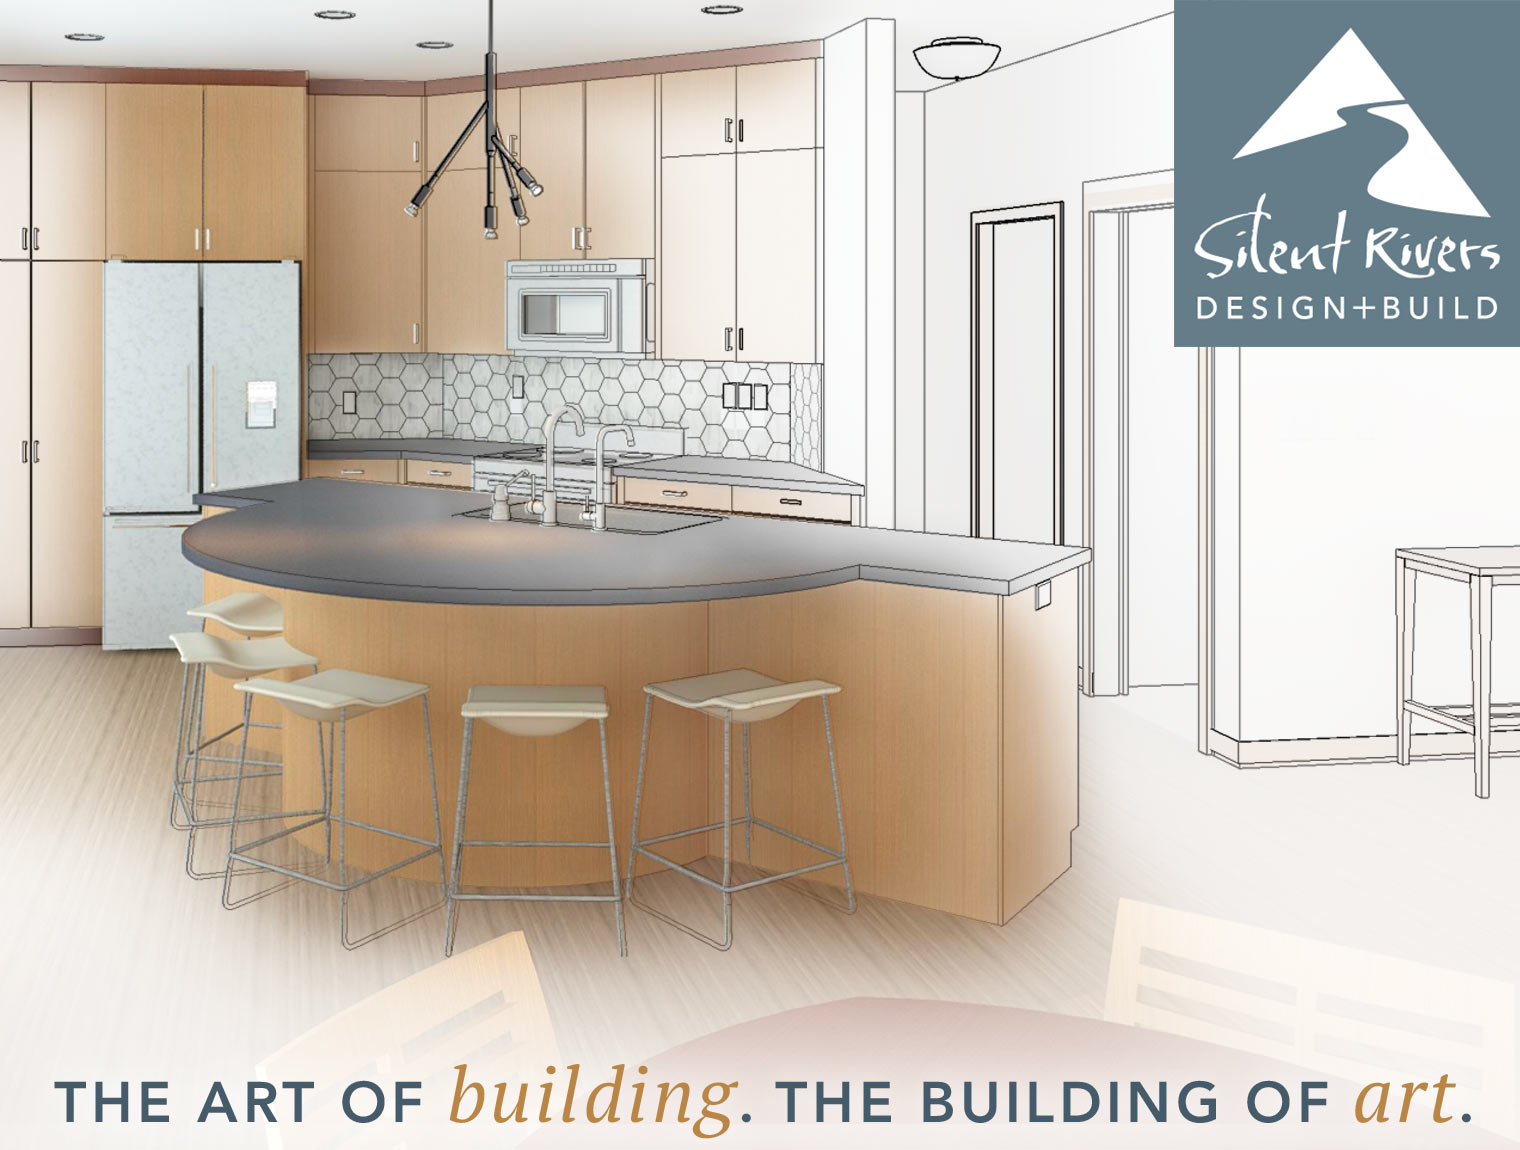 kitchen design rendering The Art of Building by Silent Rivers Design+Build